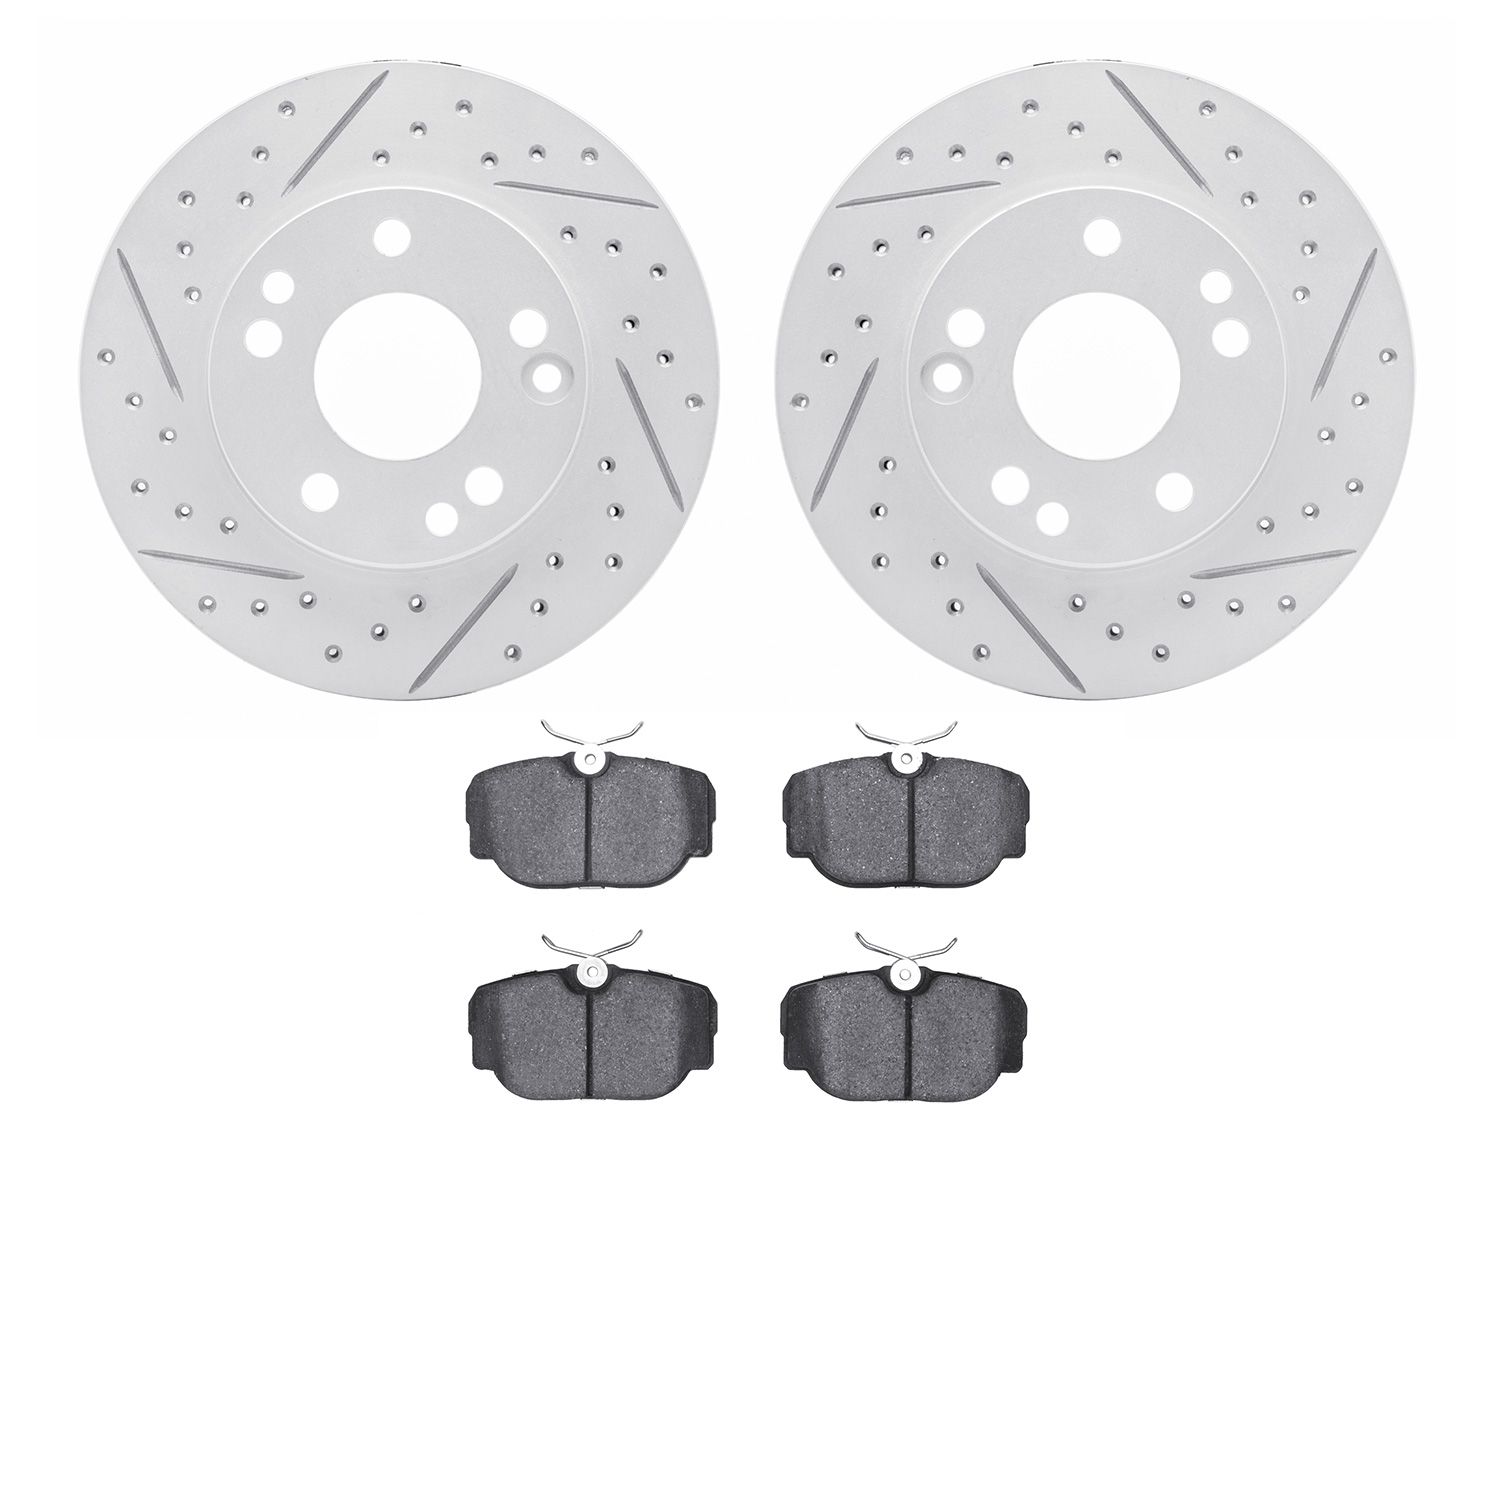 2502-63005 Geoperformance Drilled/Slotted Rotors w/5000 Advanced Brake Pads Kit, 1987-1993 Mercedes-Benz, Position: Front